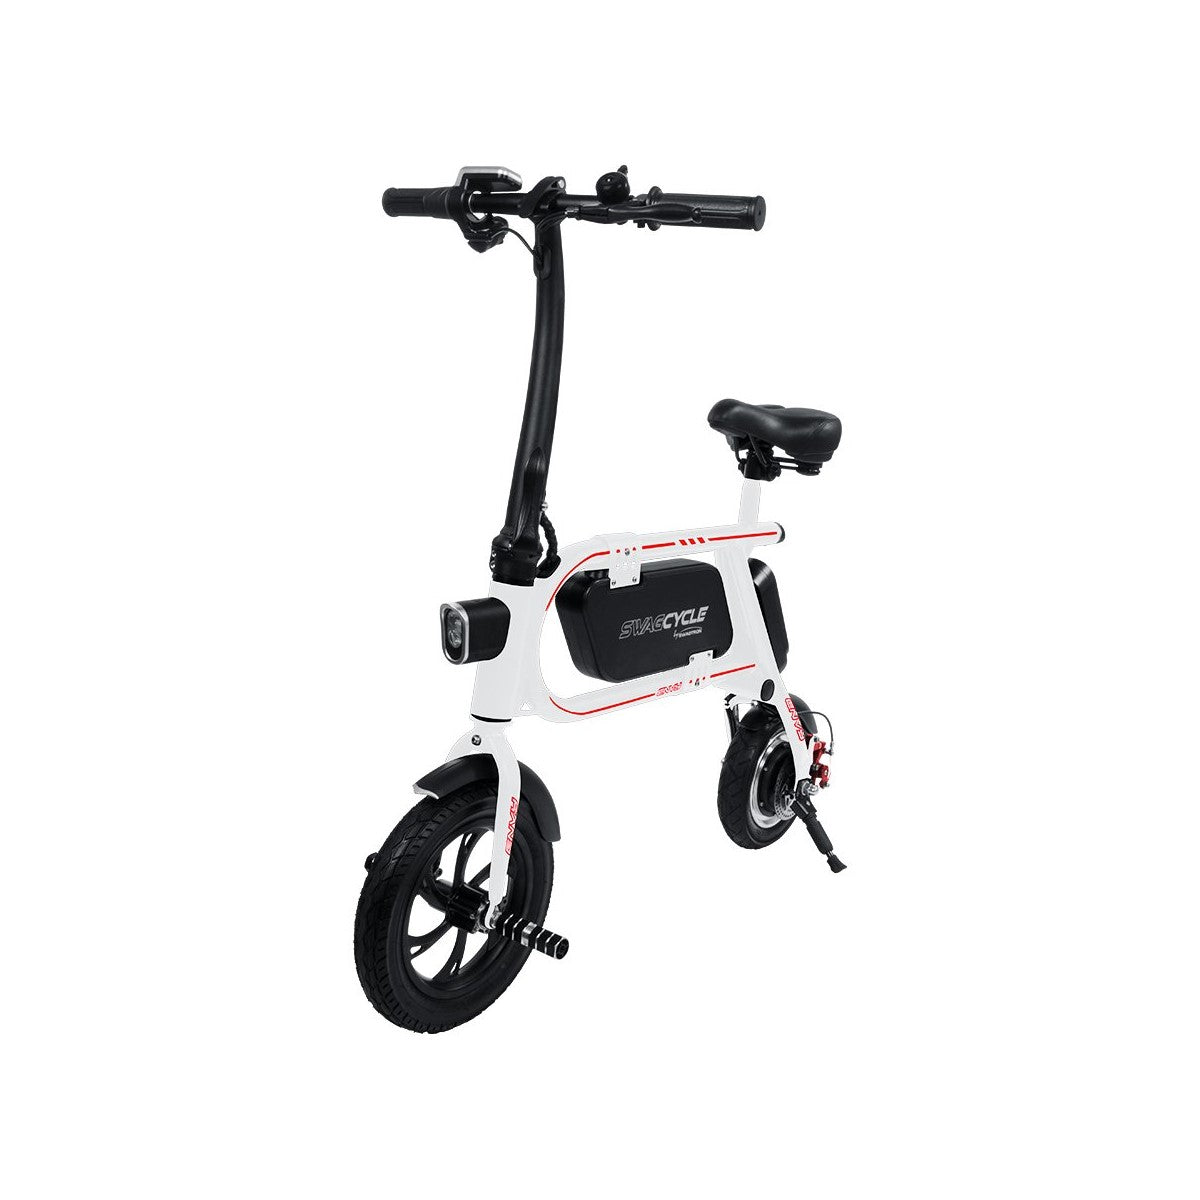 Bicicleta Electrica Refurbished Swagtron Swagcycle Sc-1 Classic Pedal-Less Blanco